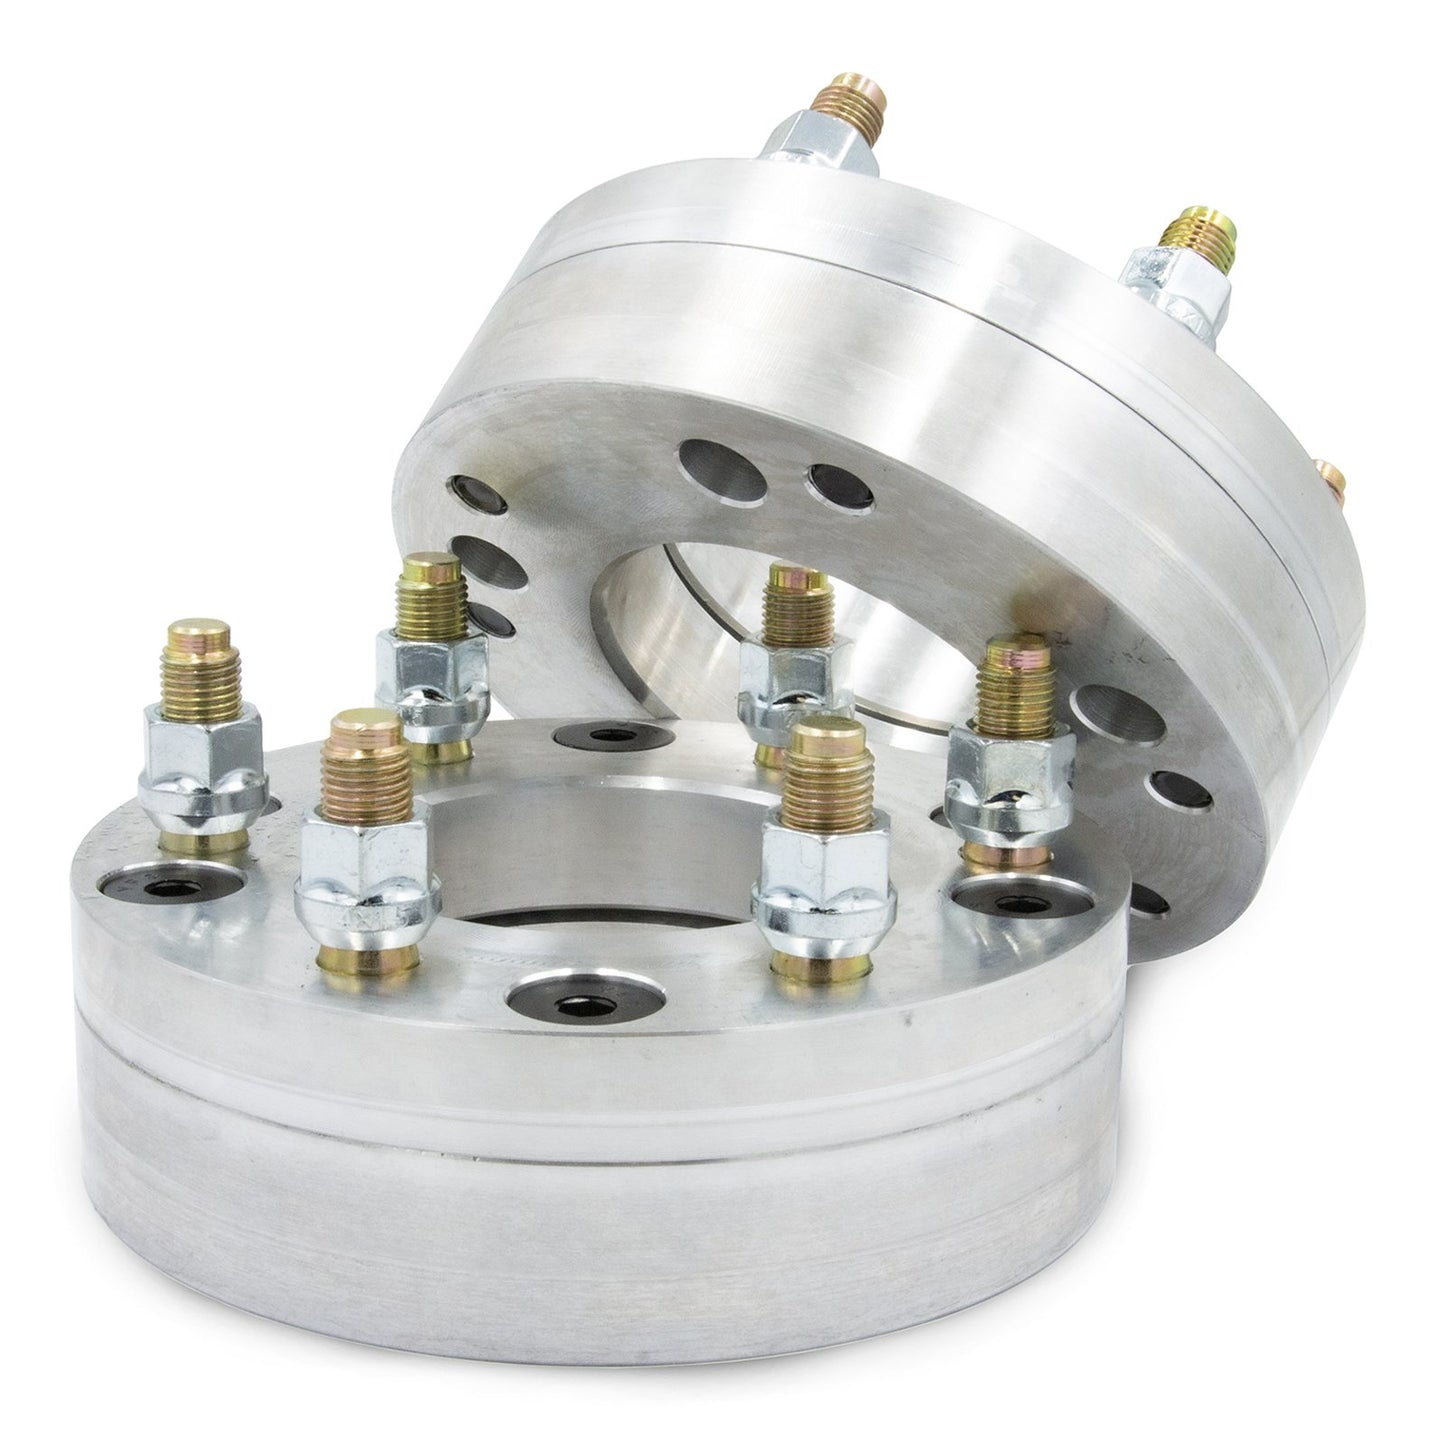 5x110 to 6x5.5" 2 piece Wheel Adapter - Thickness: 1.5" - 3"